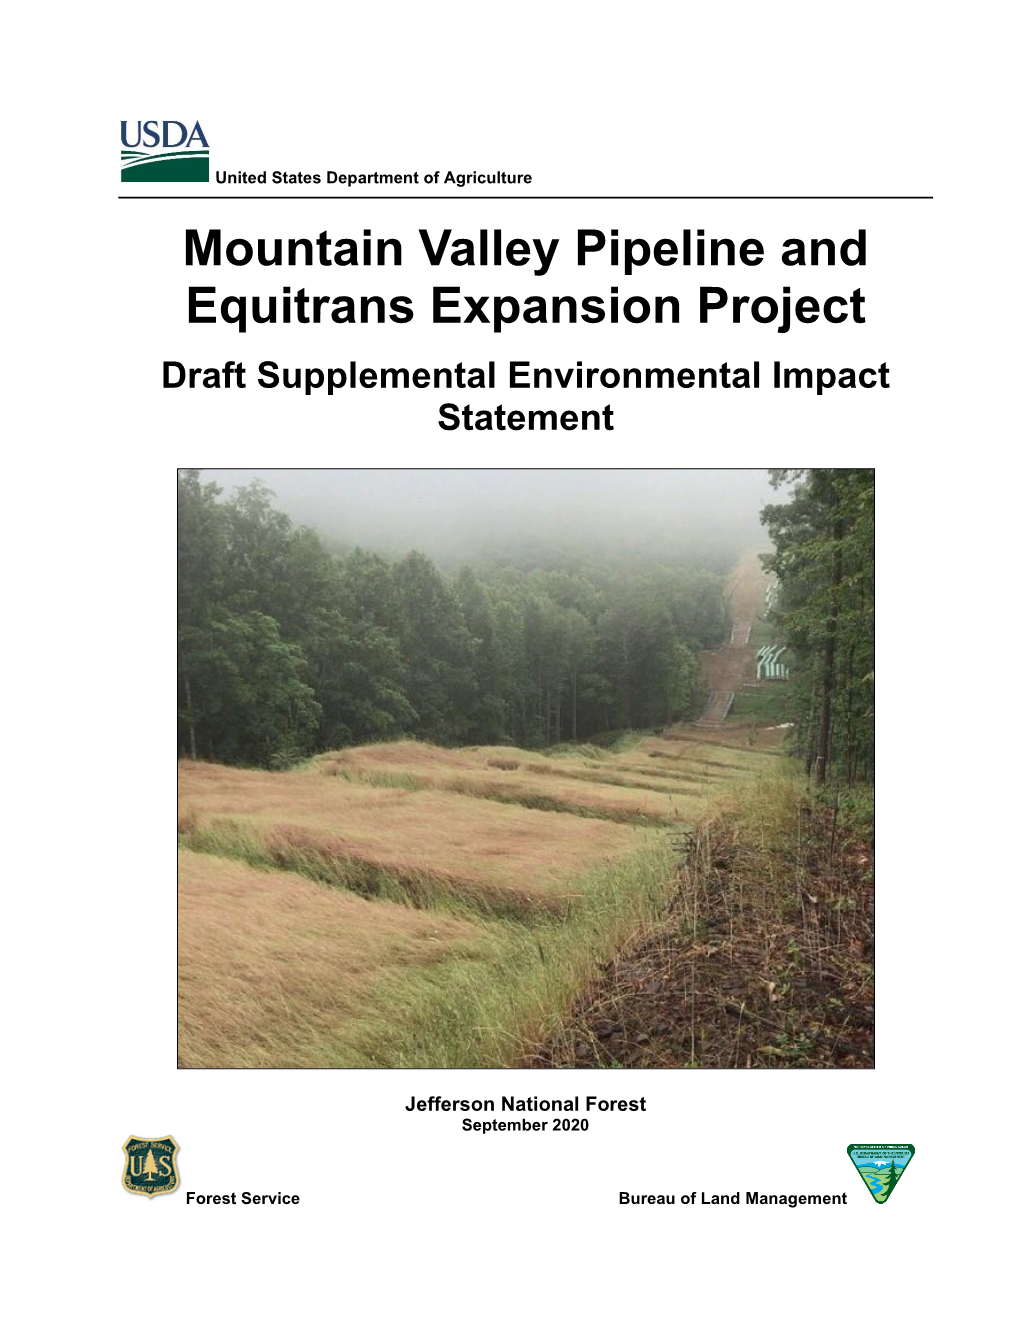 Mountain Valley Pipeline and Equitrans Expansion Project Draft Supplemental Environmental Impact Statement